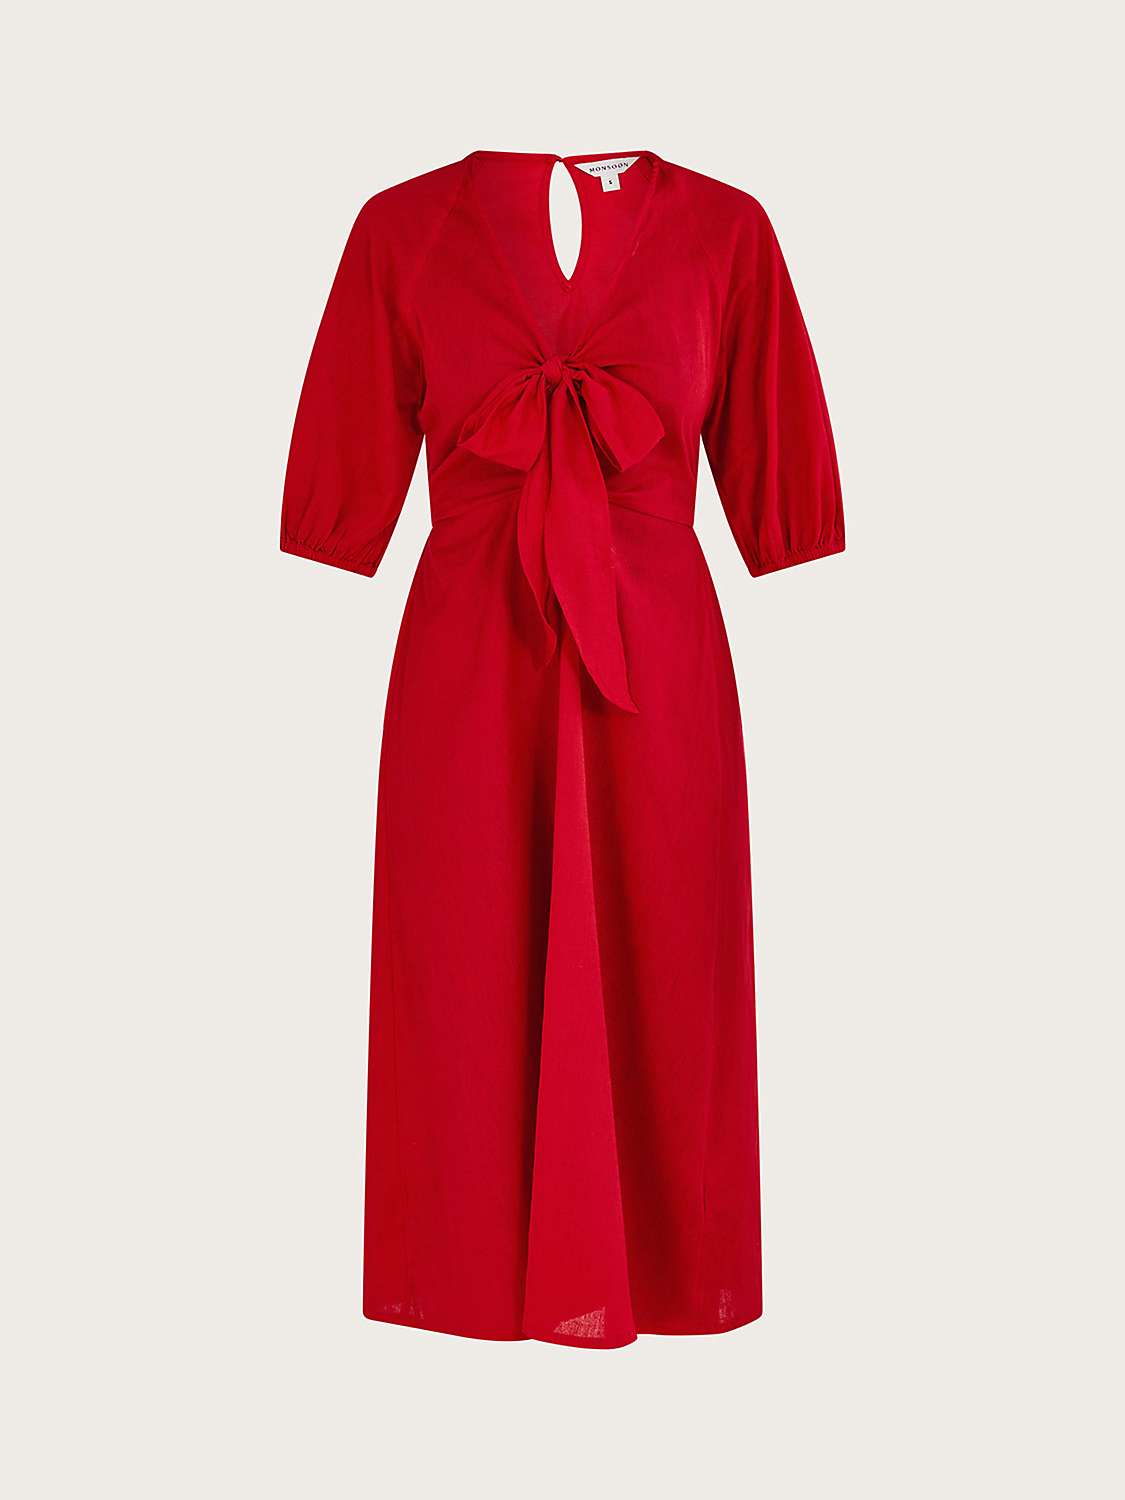 Monsoon Tie Front Midi Dress, Red at John Lewis & Partners